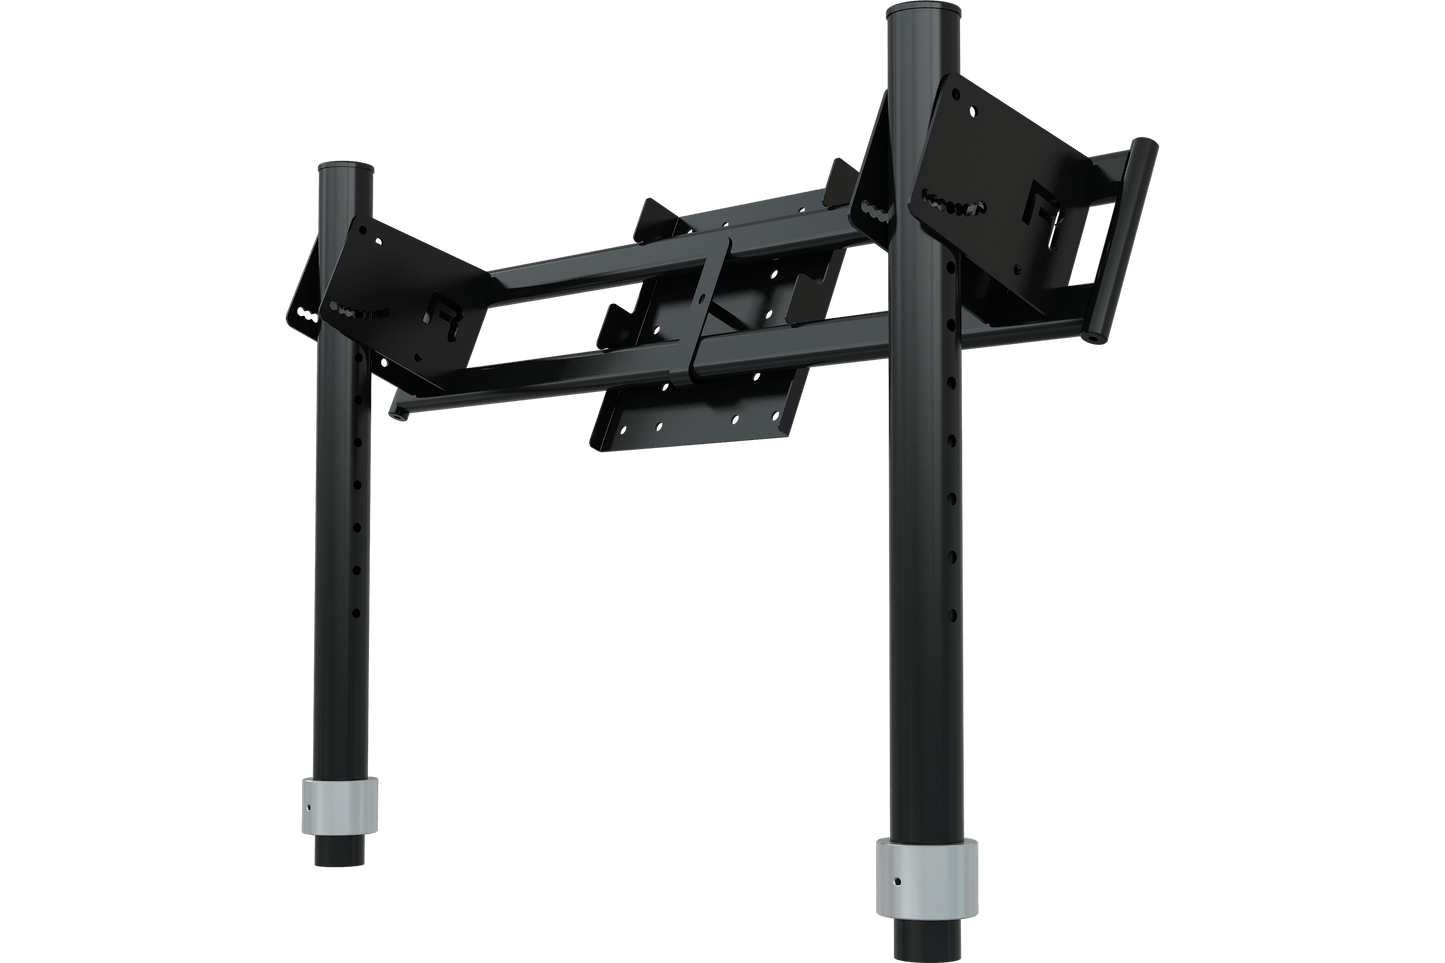 Trak Racer 4th/Top Monitor Holder - Holds 16-70" Displays